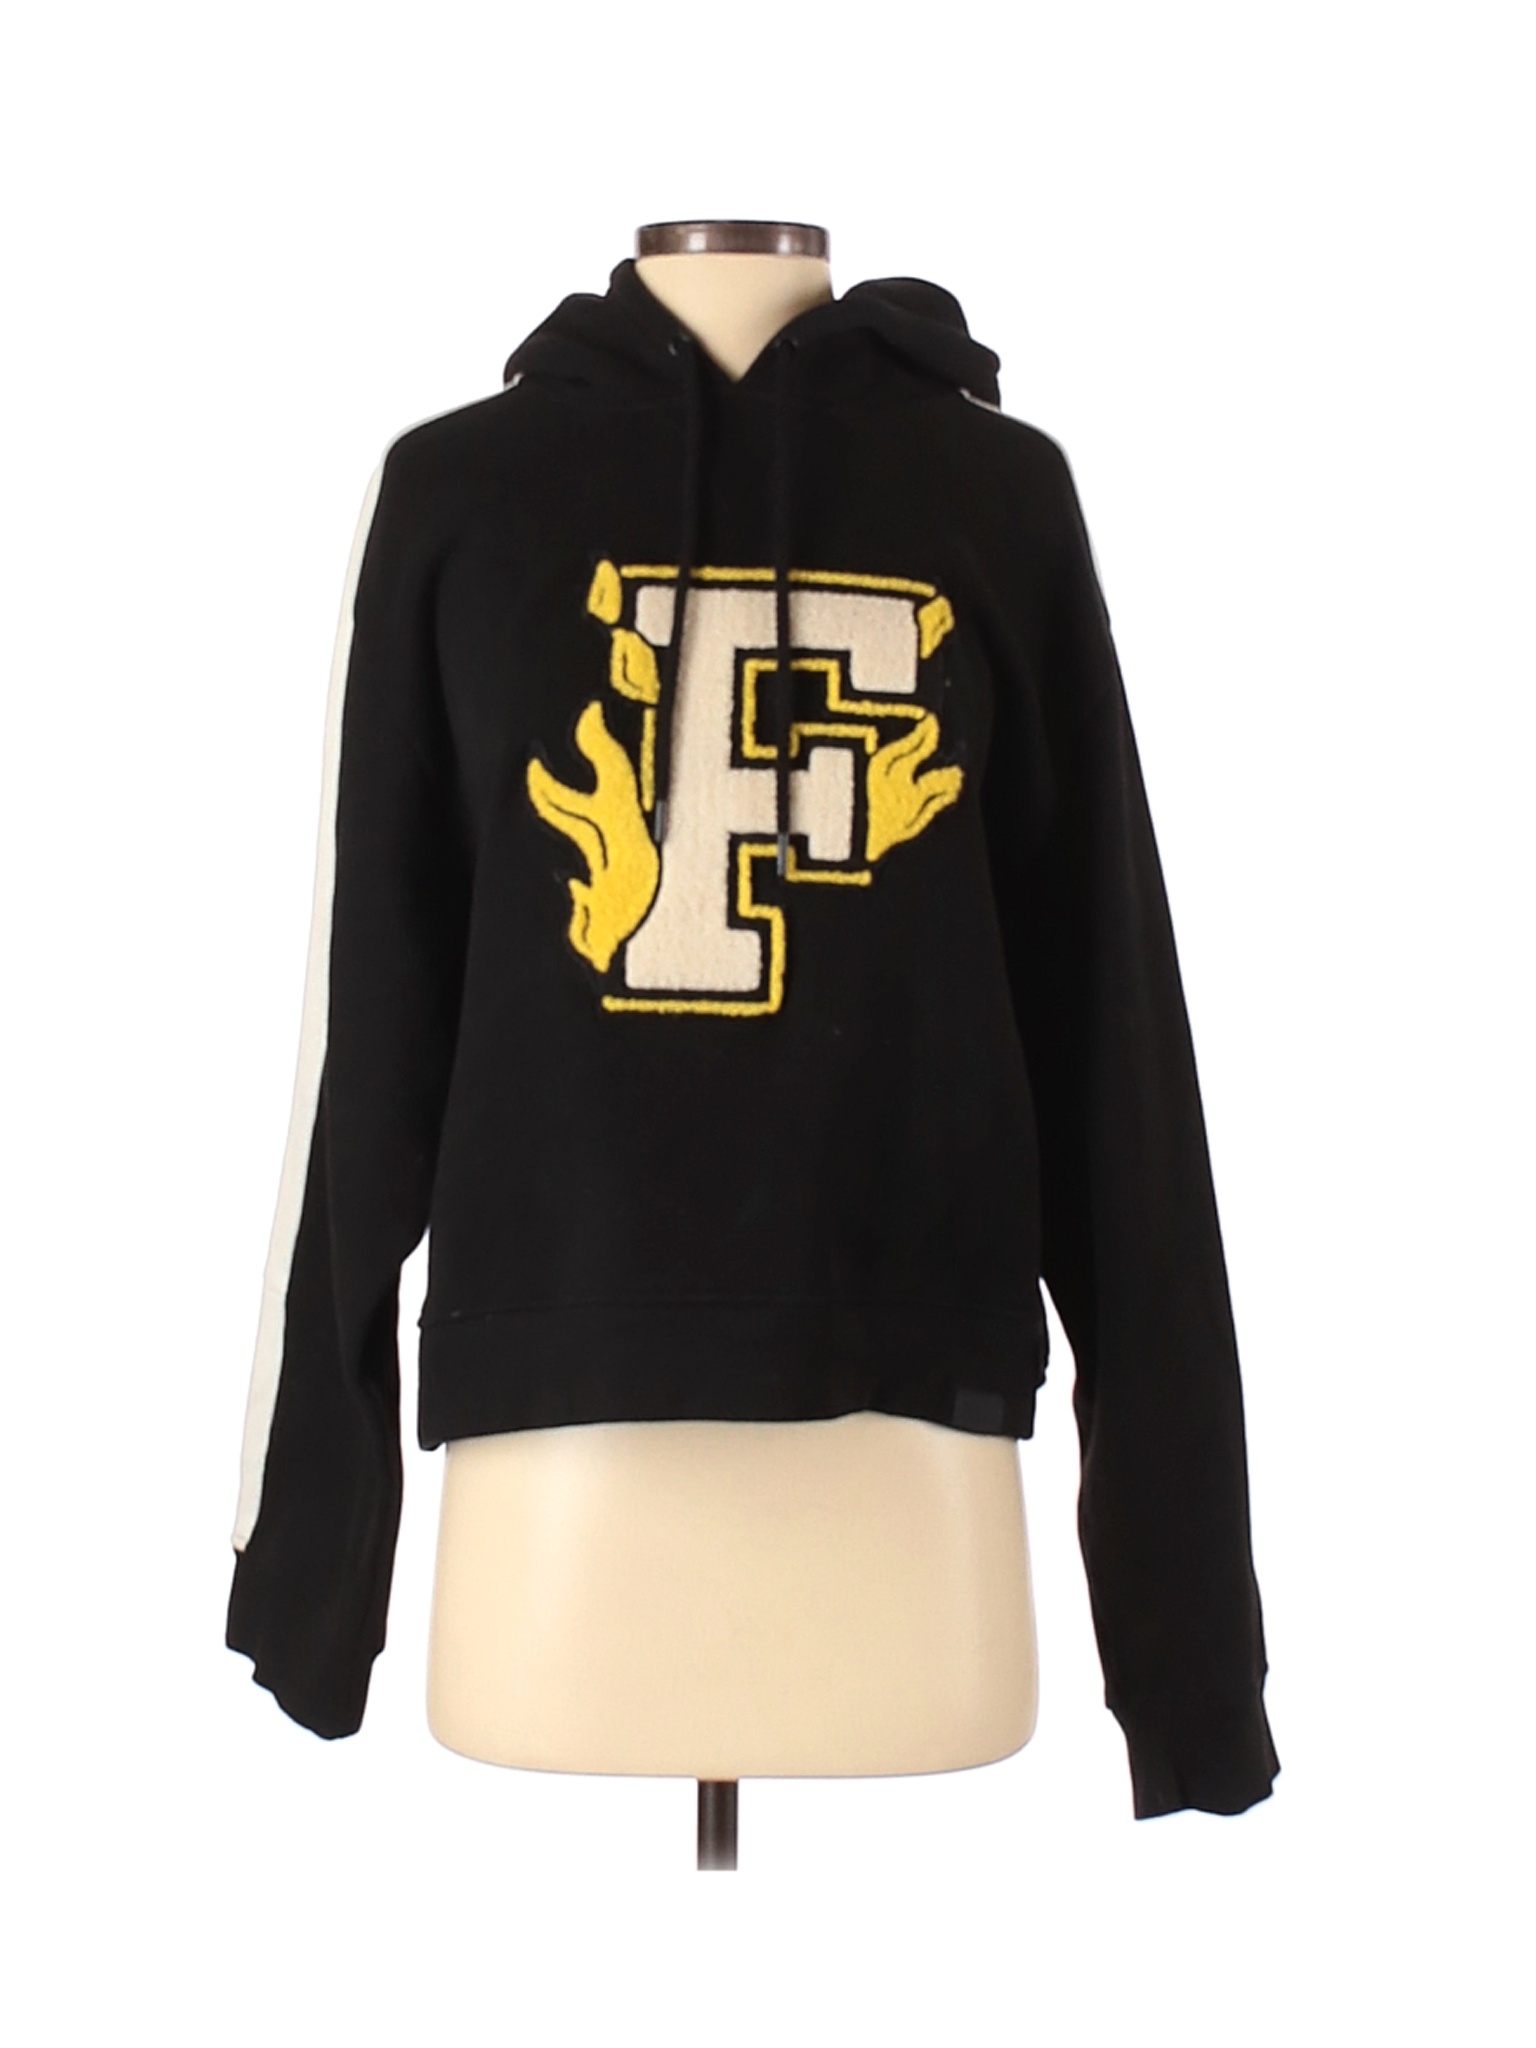 Fenty Puma By Rihanna Women S Clothing On Sale Up To 90 Off Retail Thredup